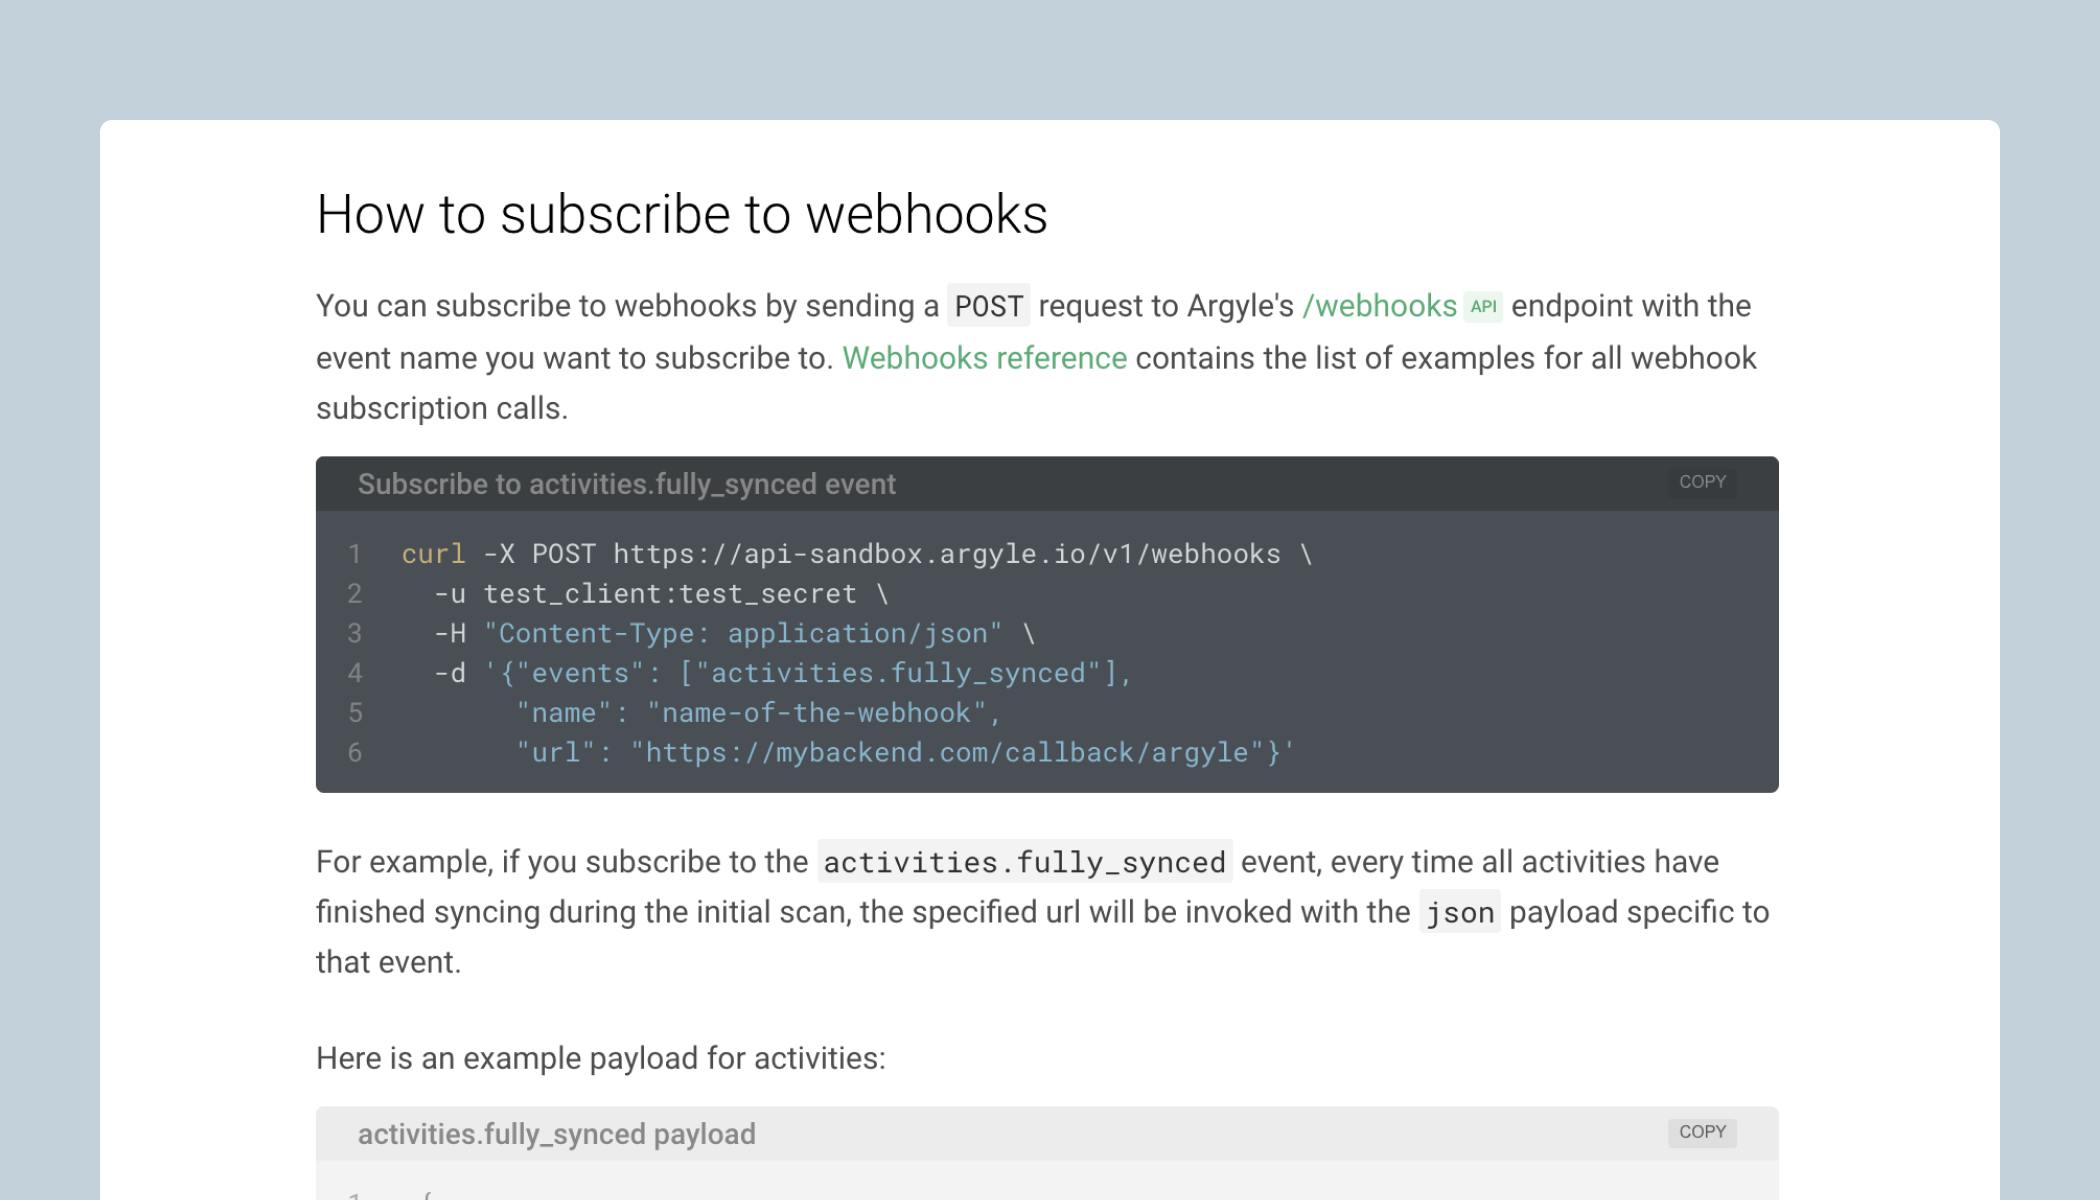 Instruction on how to subscribe to webhooks